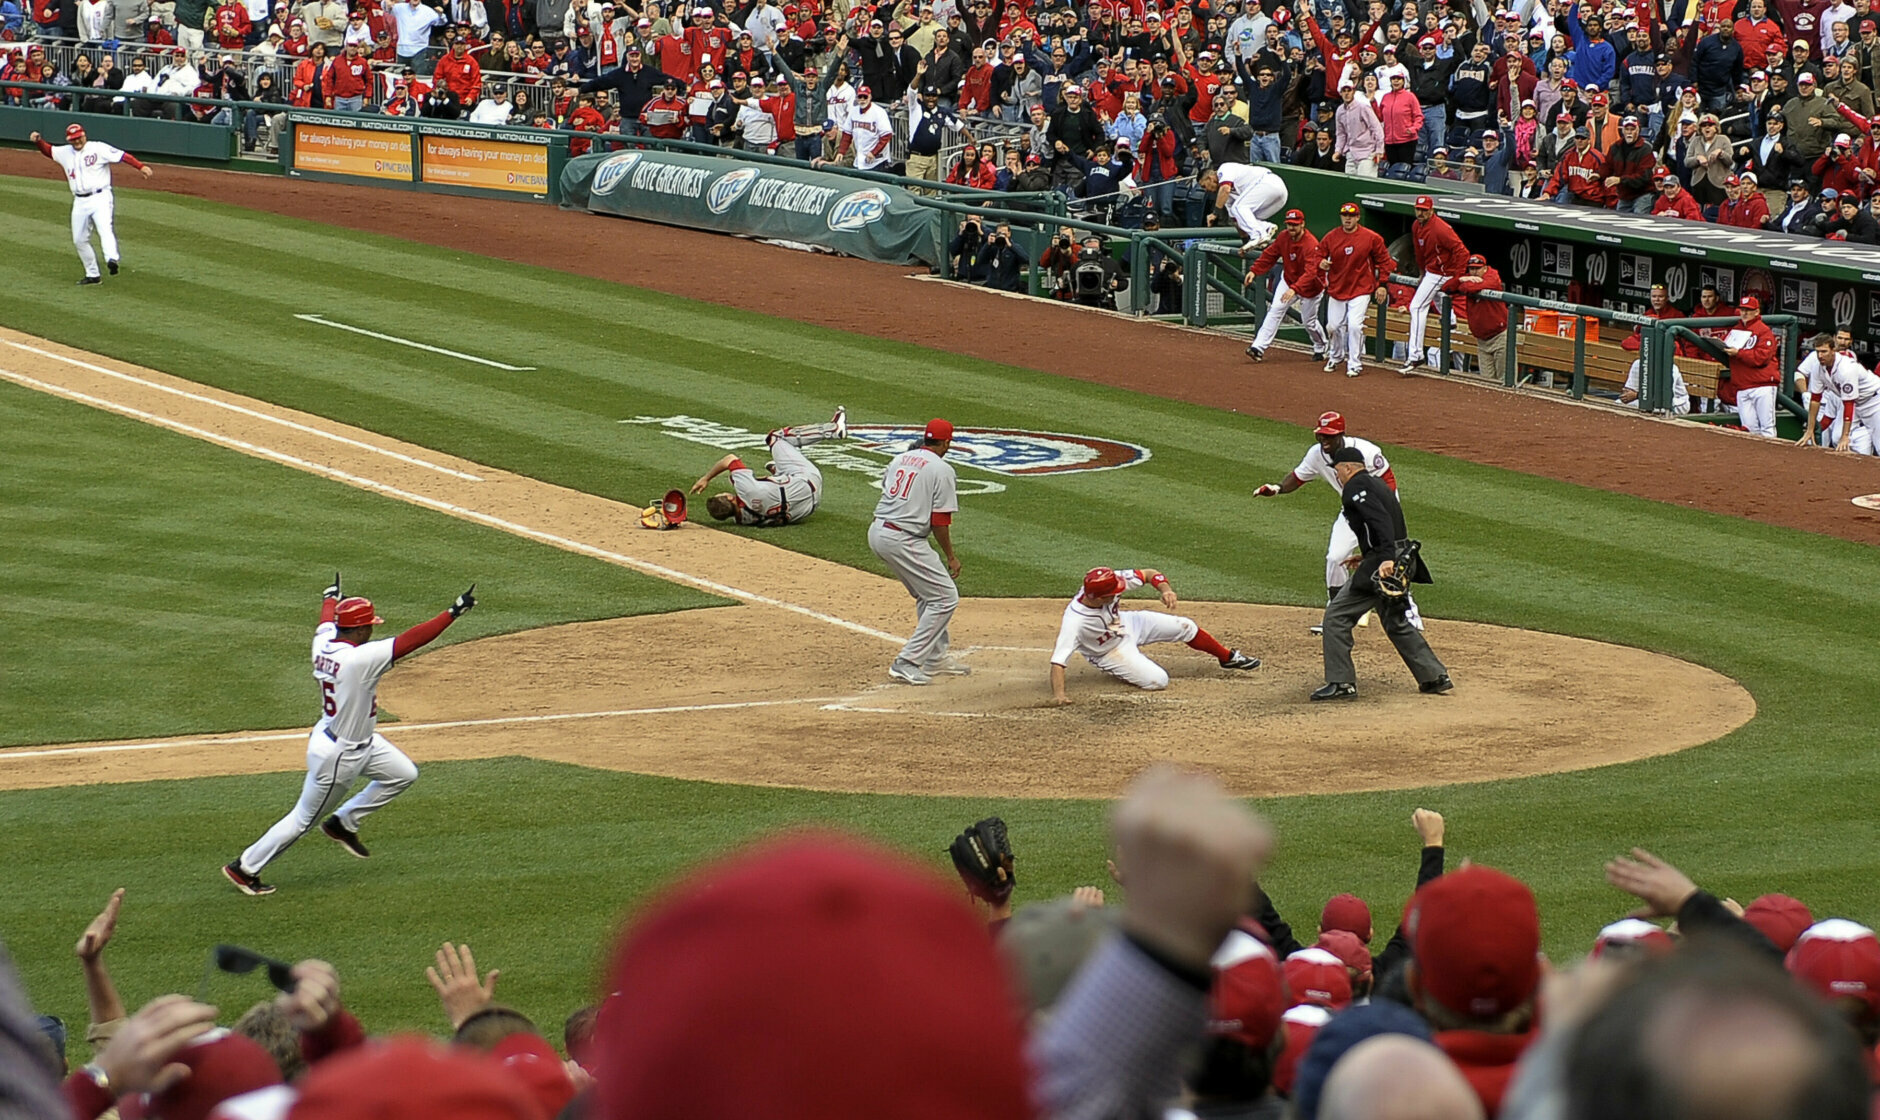 WASHINGTON, DC - APRIL 12: 
Washington Nationals' Ryan Zimmerman slides in to home plate winning the game in the tenth inning after a wild pitch by Cincinnati Reds' Alfredo Simon during opening day at Nationals Park on April 12, 2012 in Washington, D.C. The Nationals beat the Reds 3-2. (Photo by Ricky Carioti/The Washington Post via Getty Images)